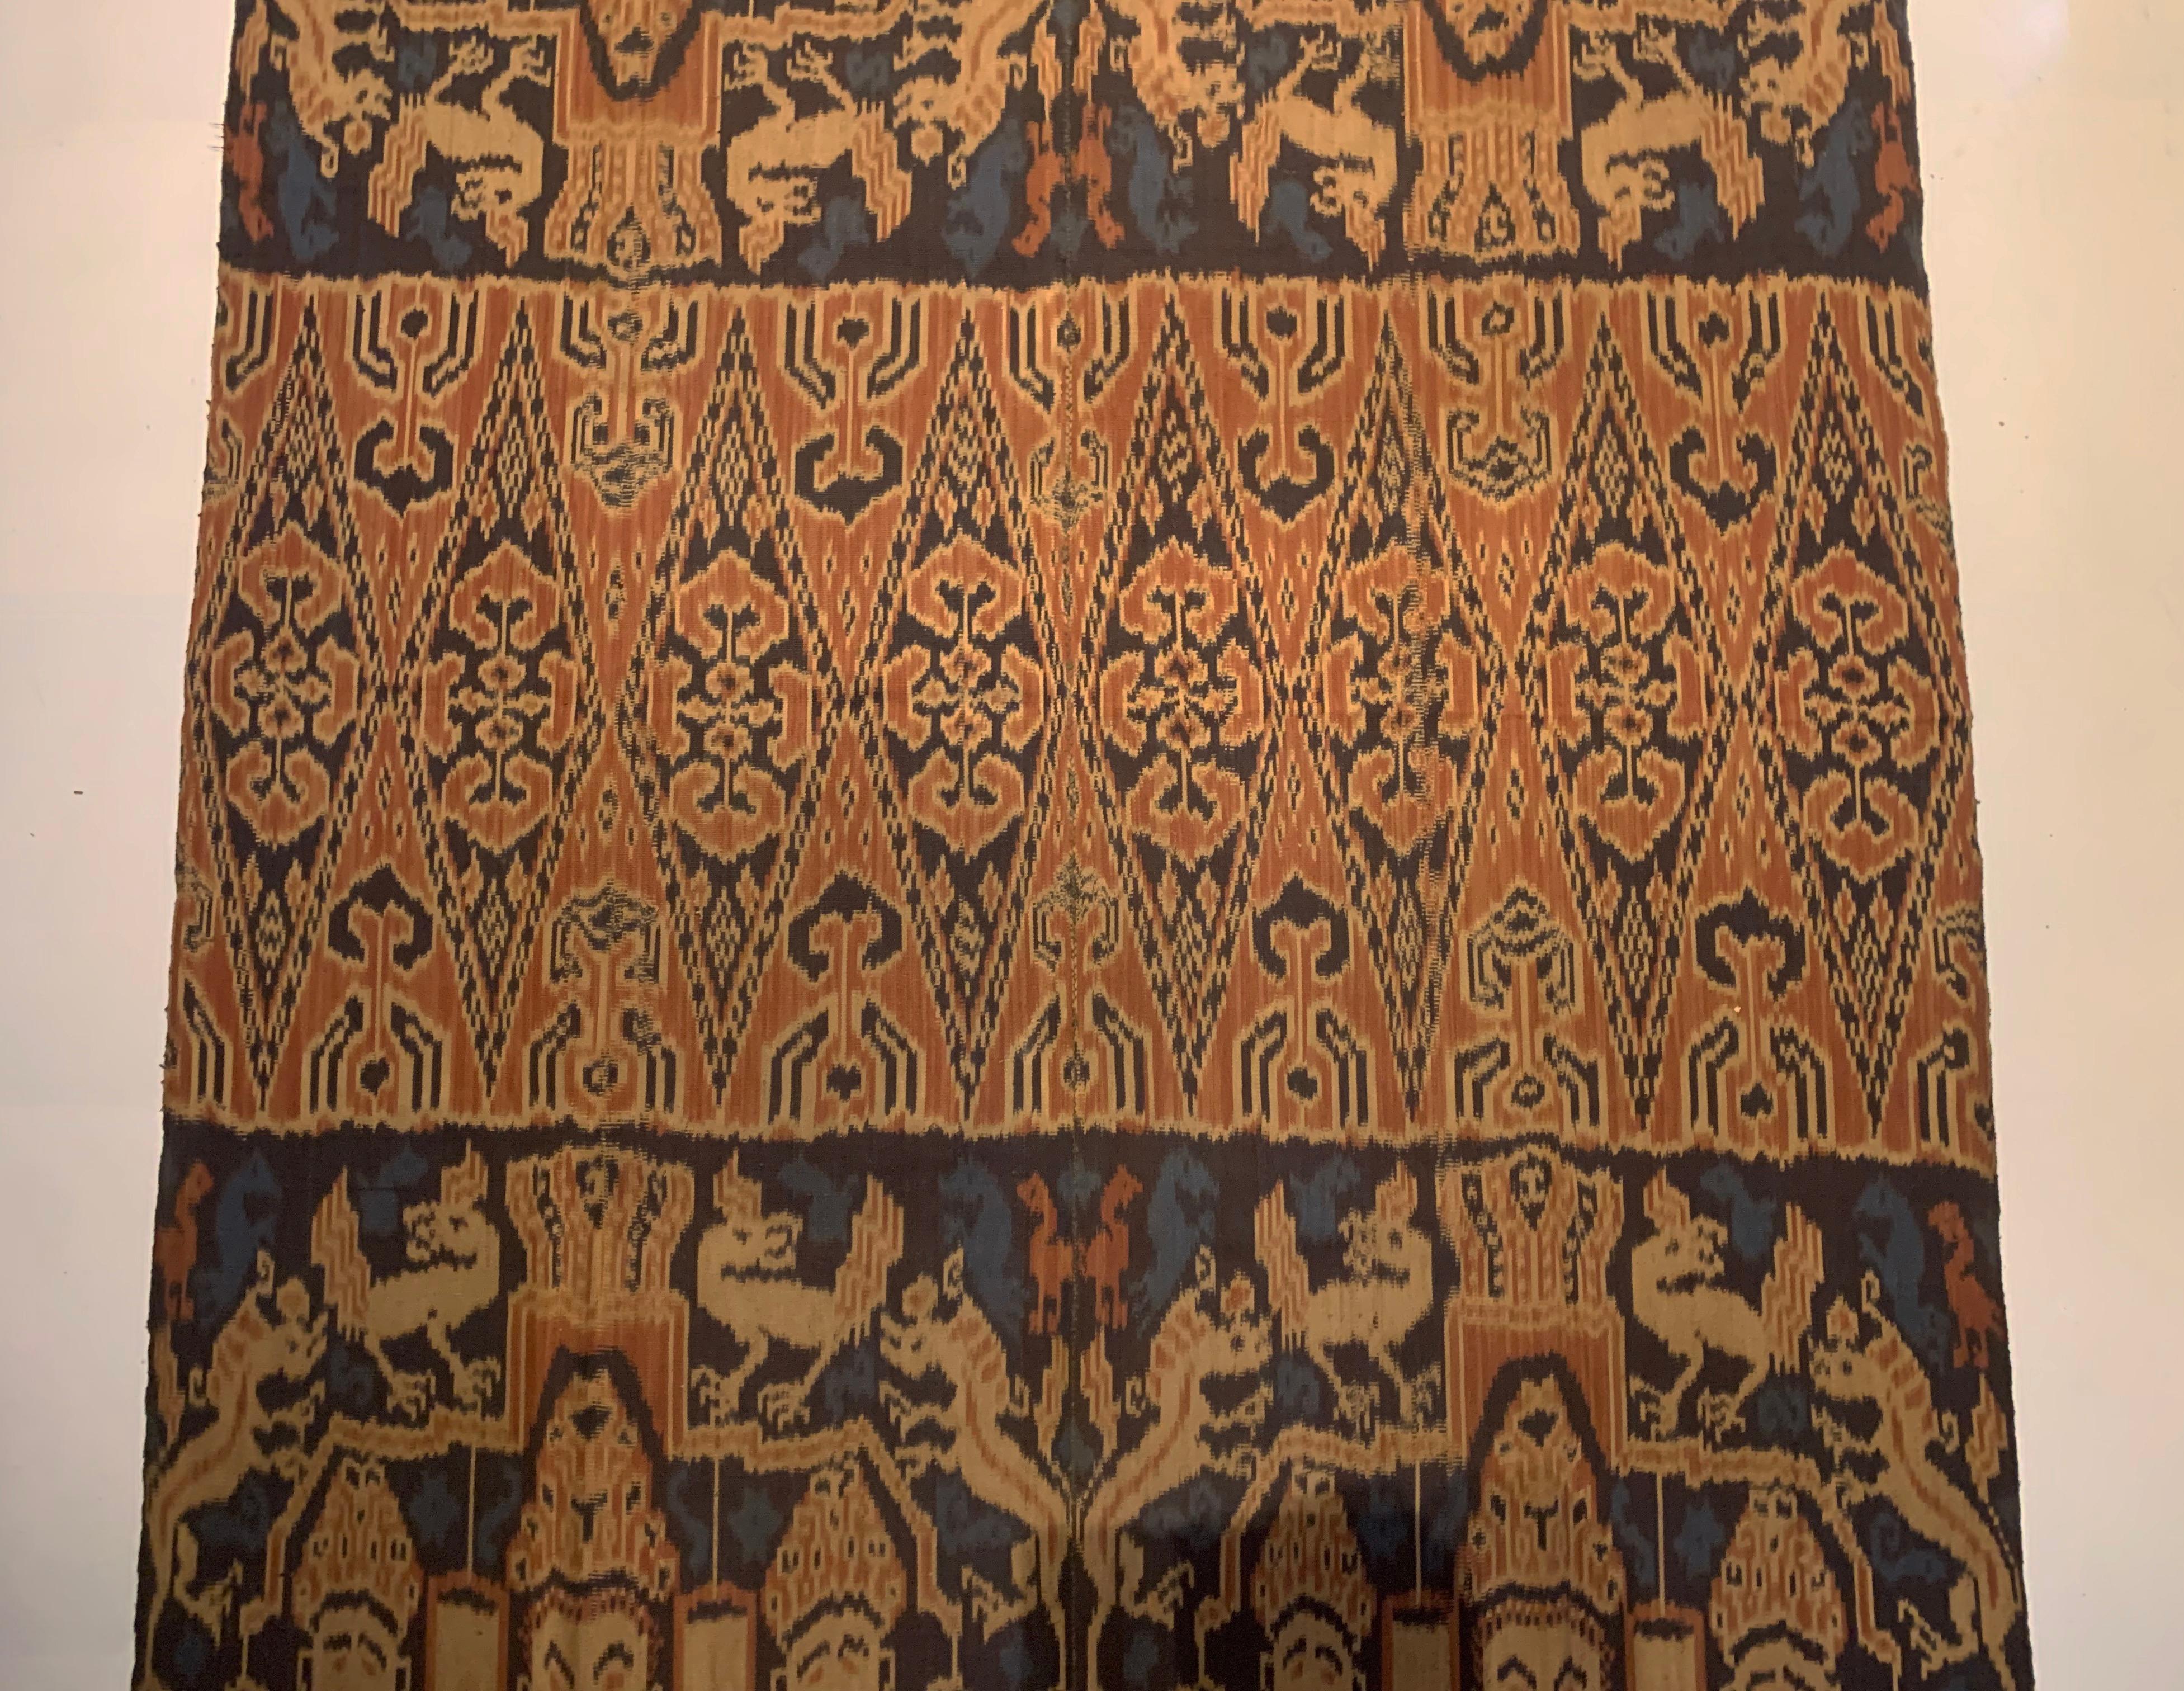 Hand-Woven Rare Ikat Textile from Sumba Island Stunning Tribal Motifs, Indonesia  For Sale